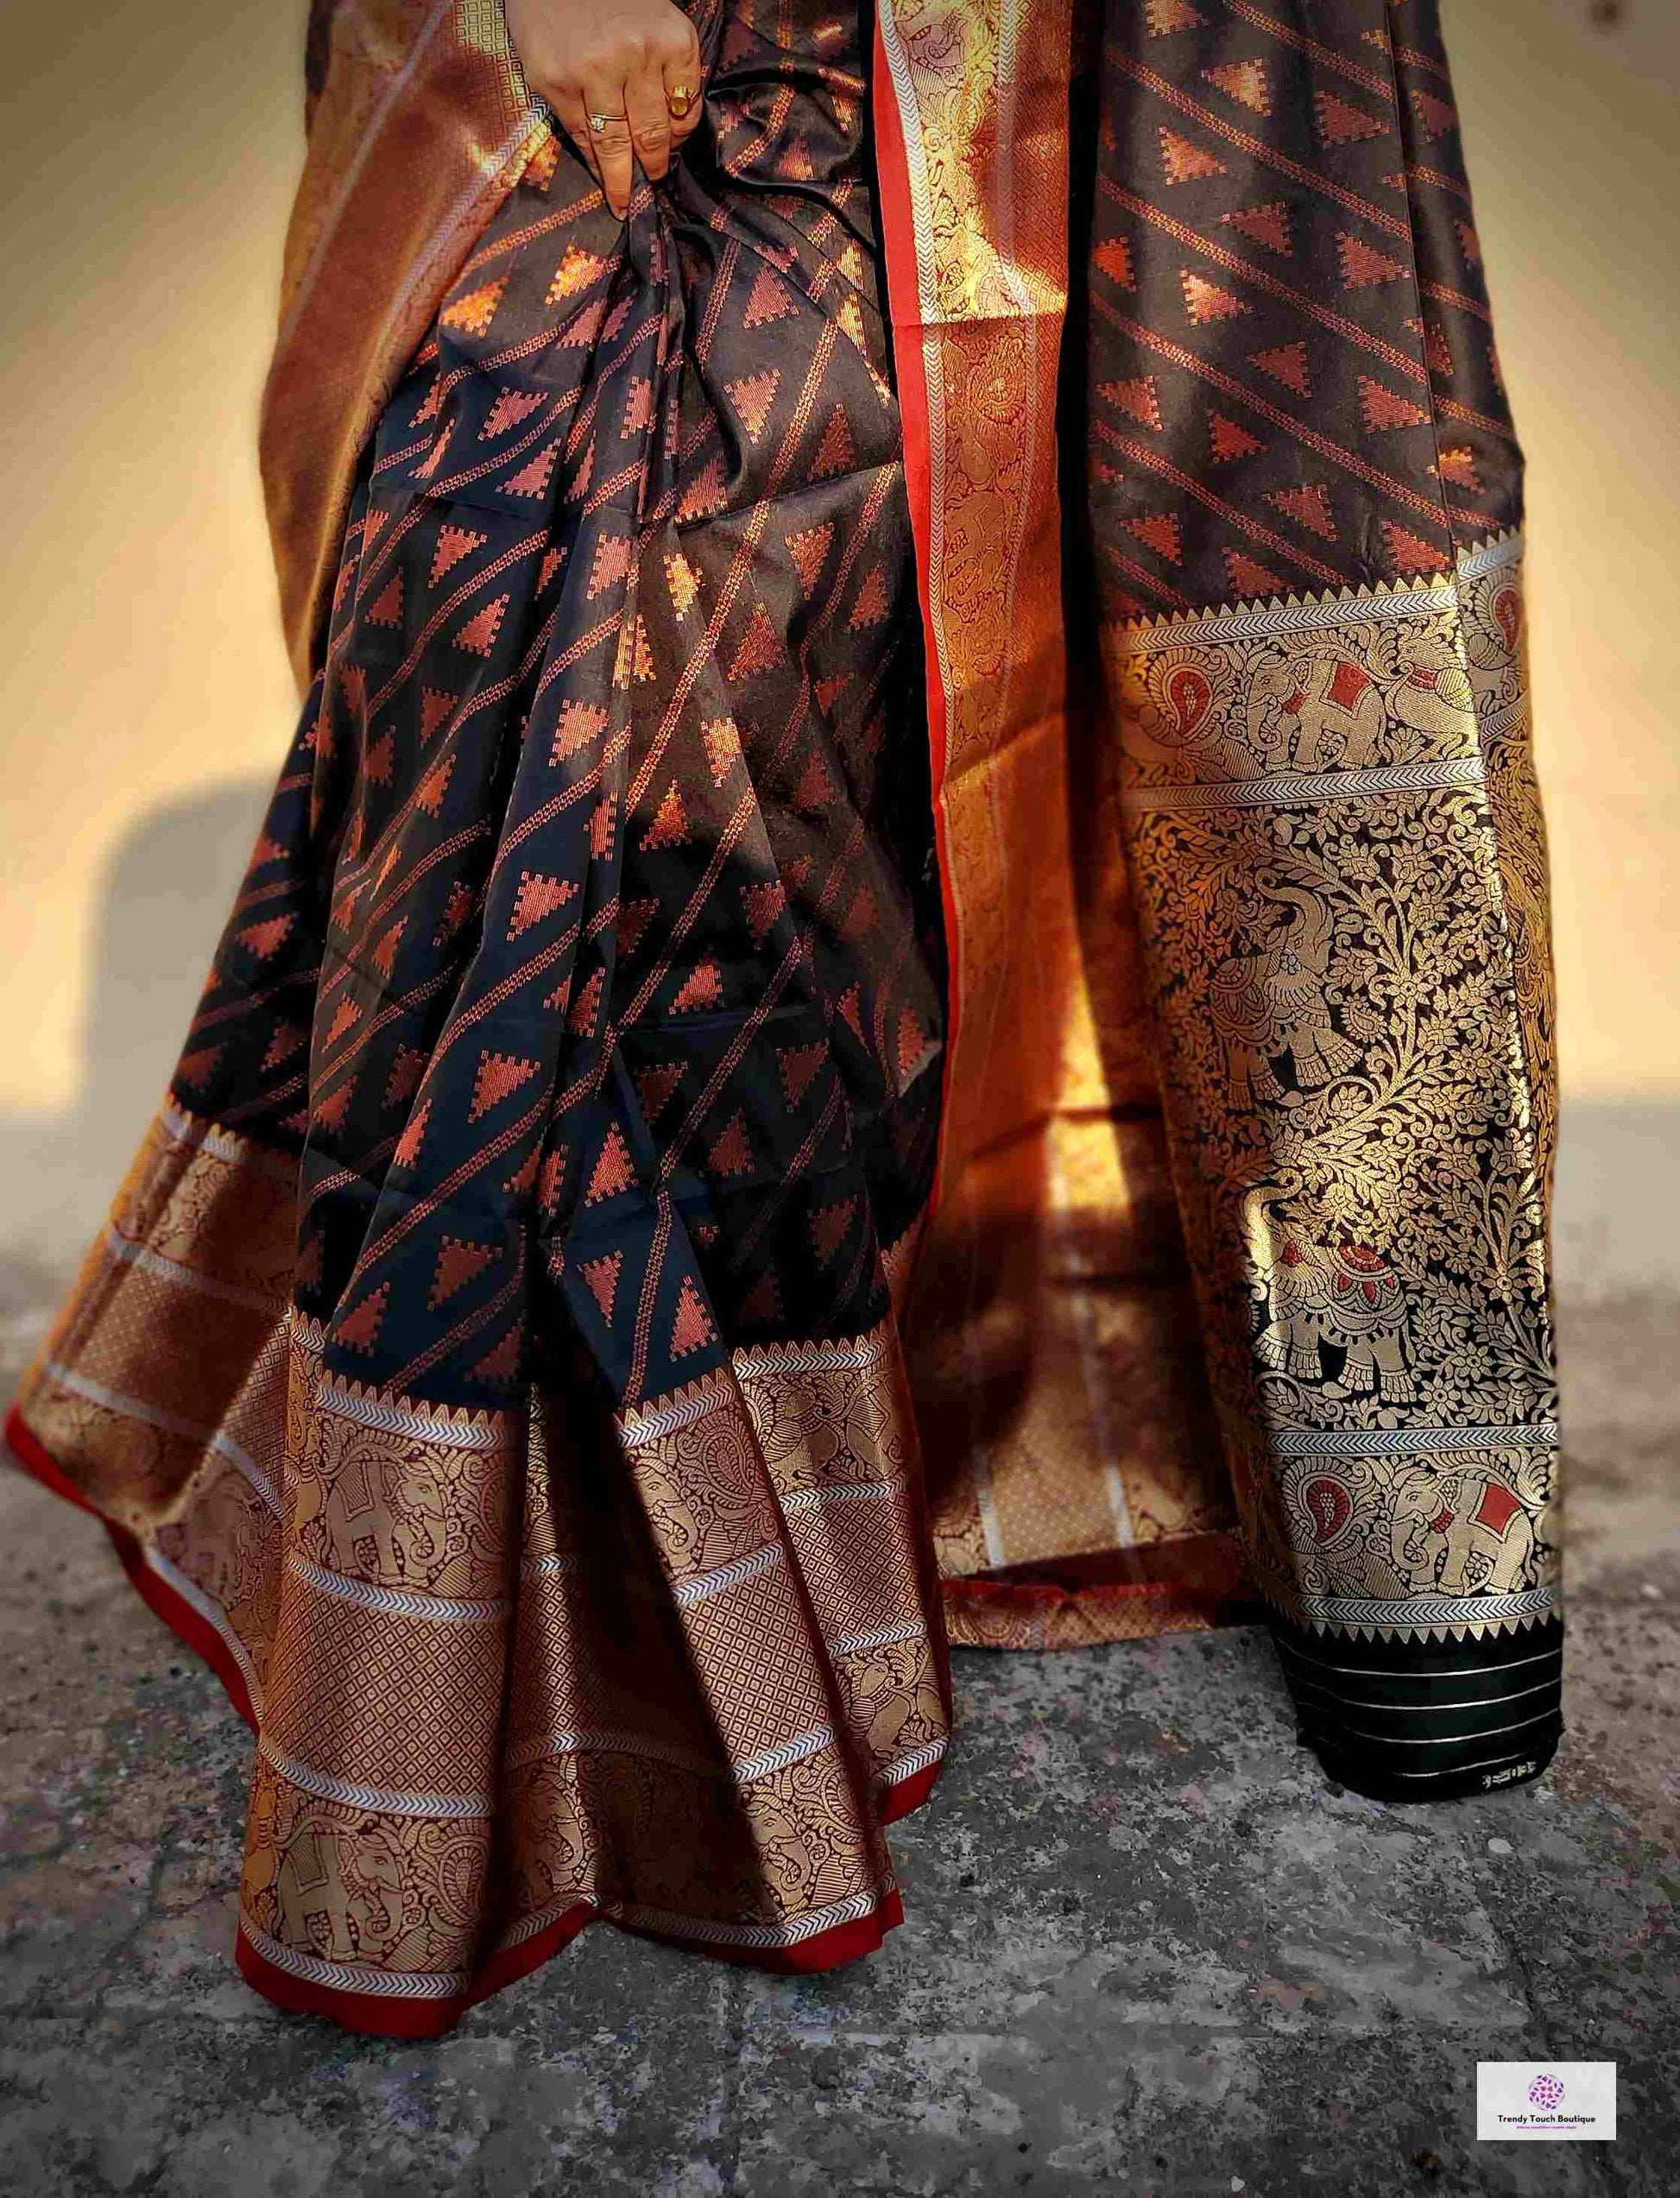 Kanjivaram styled black copper zari work party wear special occasion saree for wedding function or bridal gift